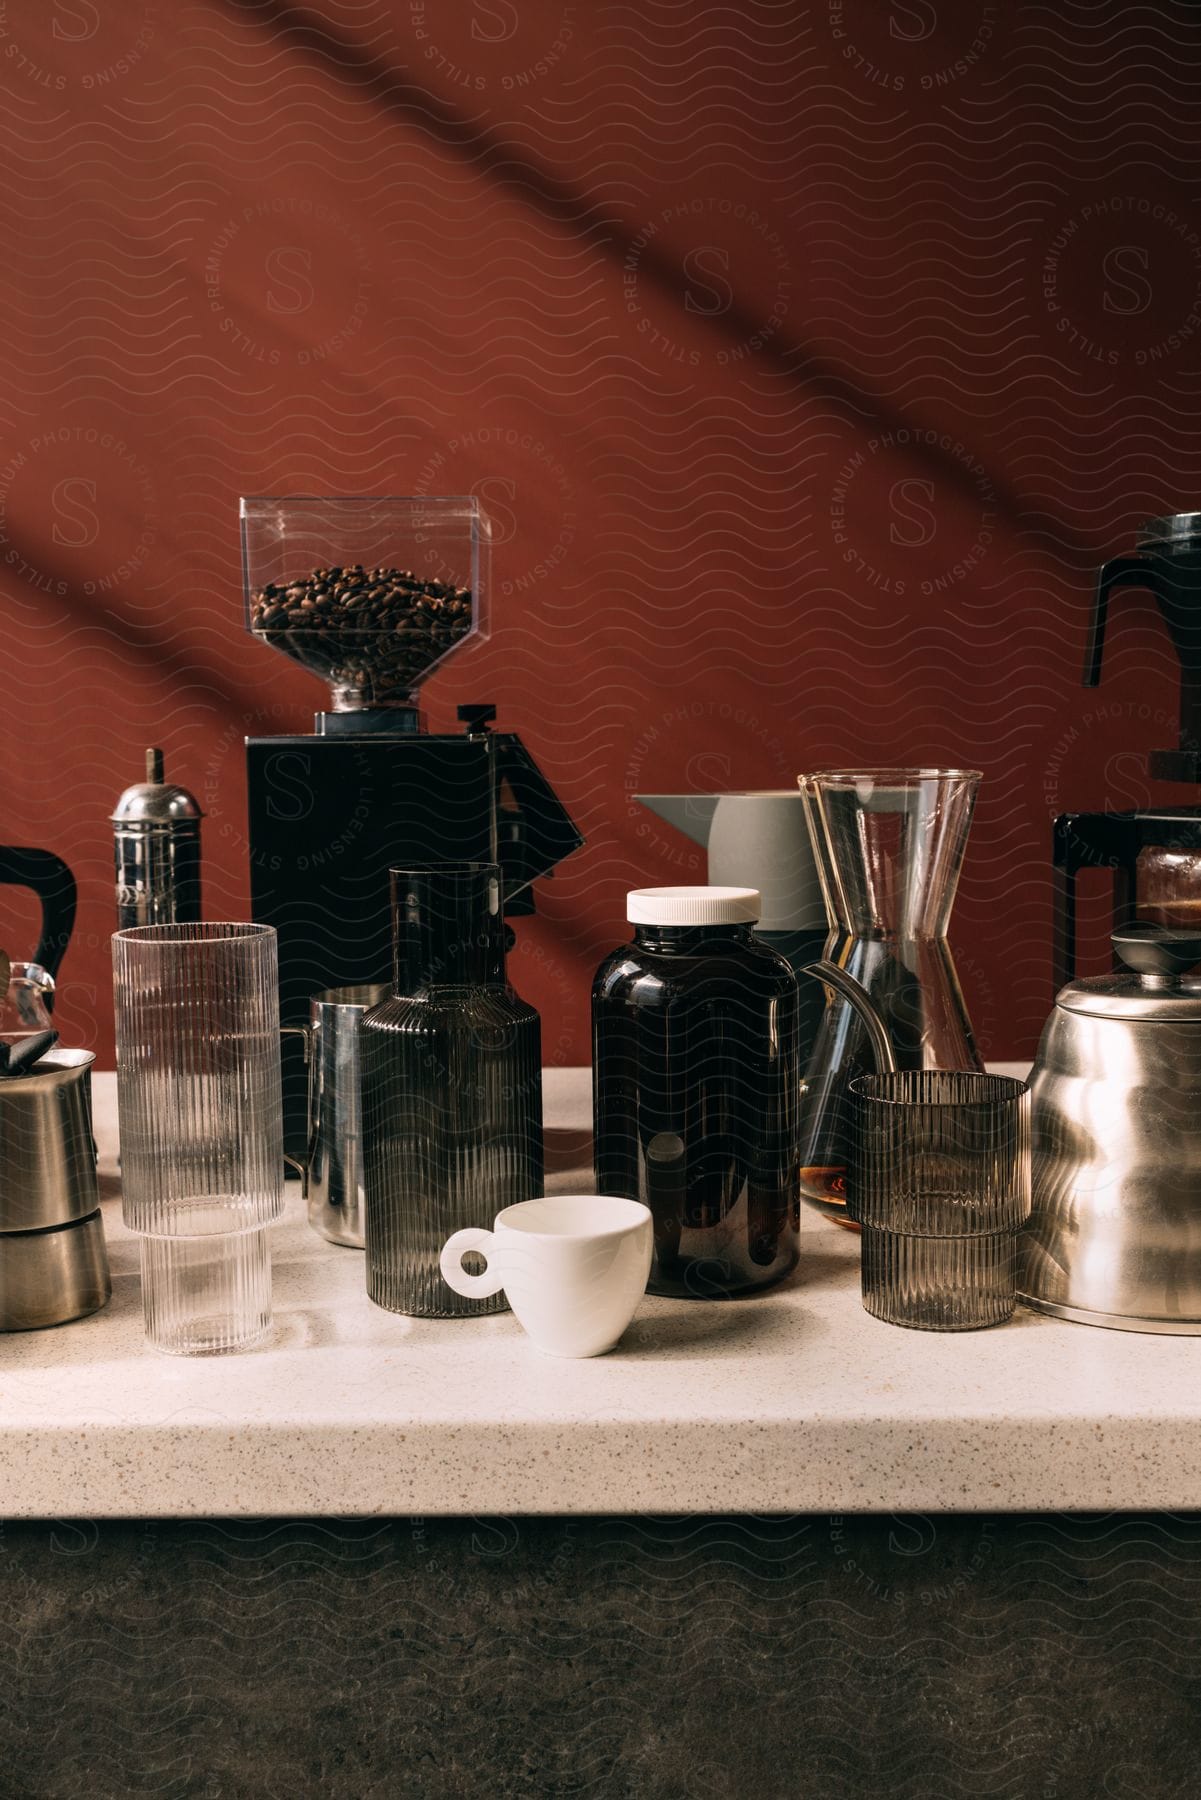 Stock photo of a coffee grinder and utensils on a bar countertop.